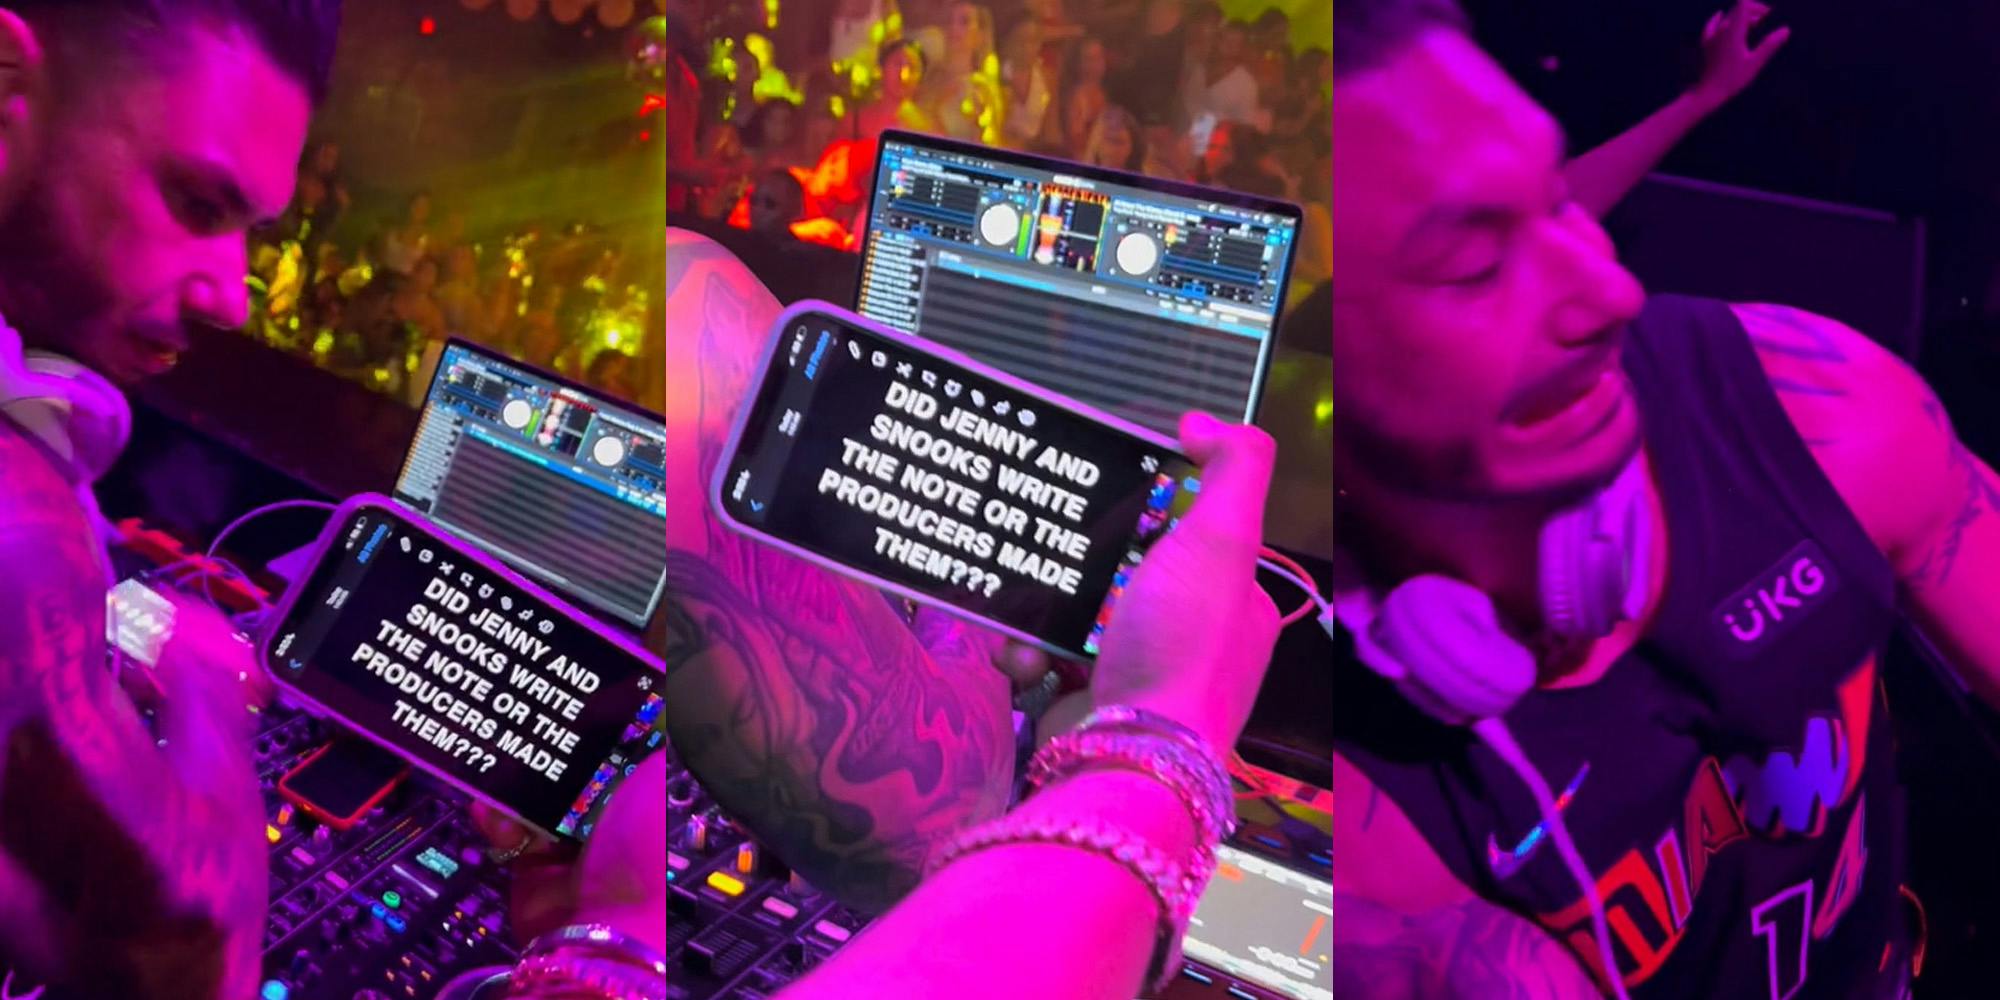 Pauly D DJ at club person holding phone with caption "DID JENNY AND SNOOKS WRITE THE NOTE OR THE PRODUCERS MADE THEM??" (l) person holding phone with caption"DID JENNY AND SNOOKS WRITE THE NOTE OR THE PRODUCERS MADE THEM??" (c) Pauly D's reaction to reading phone (r)